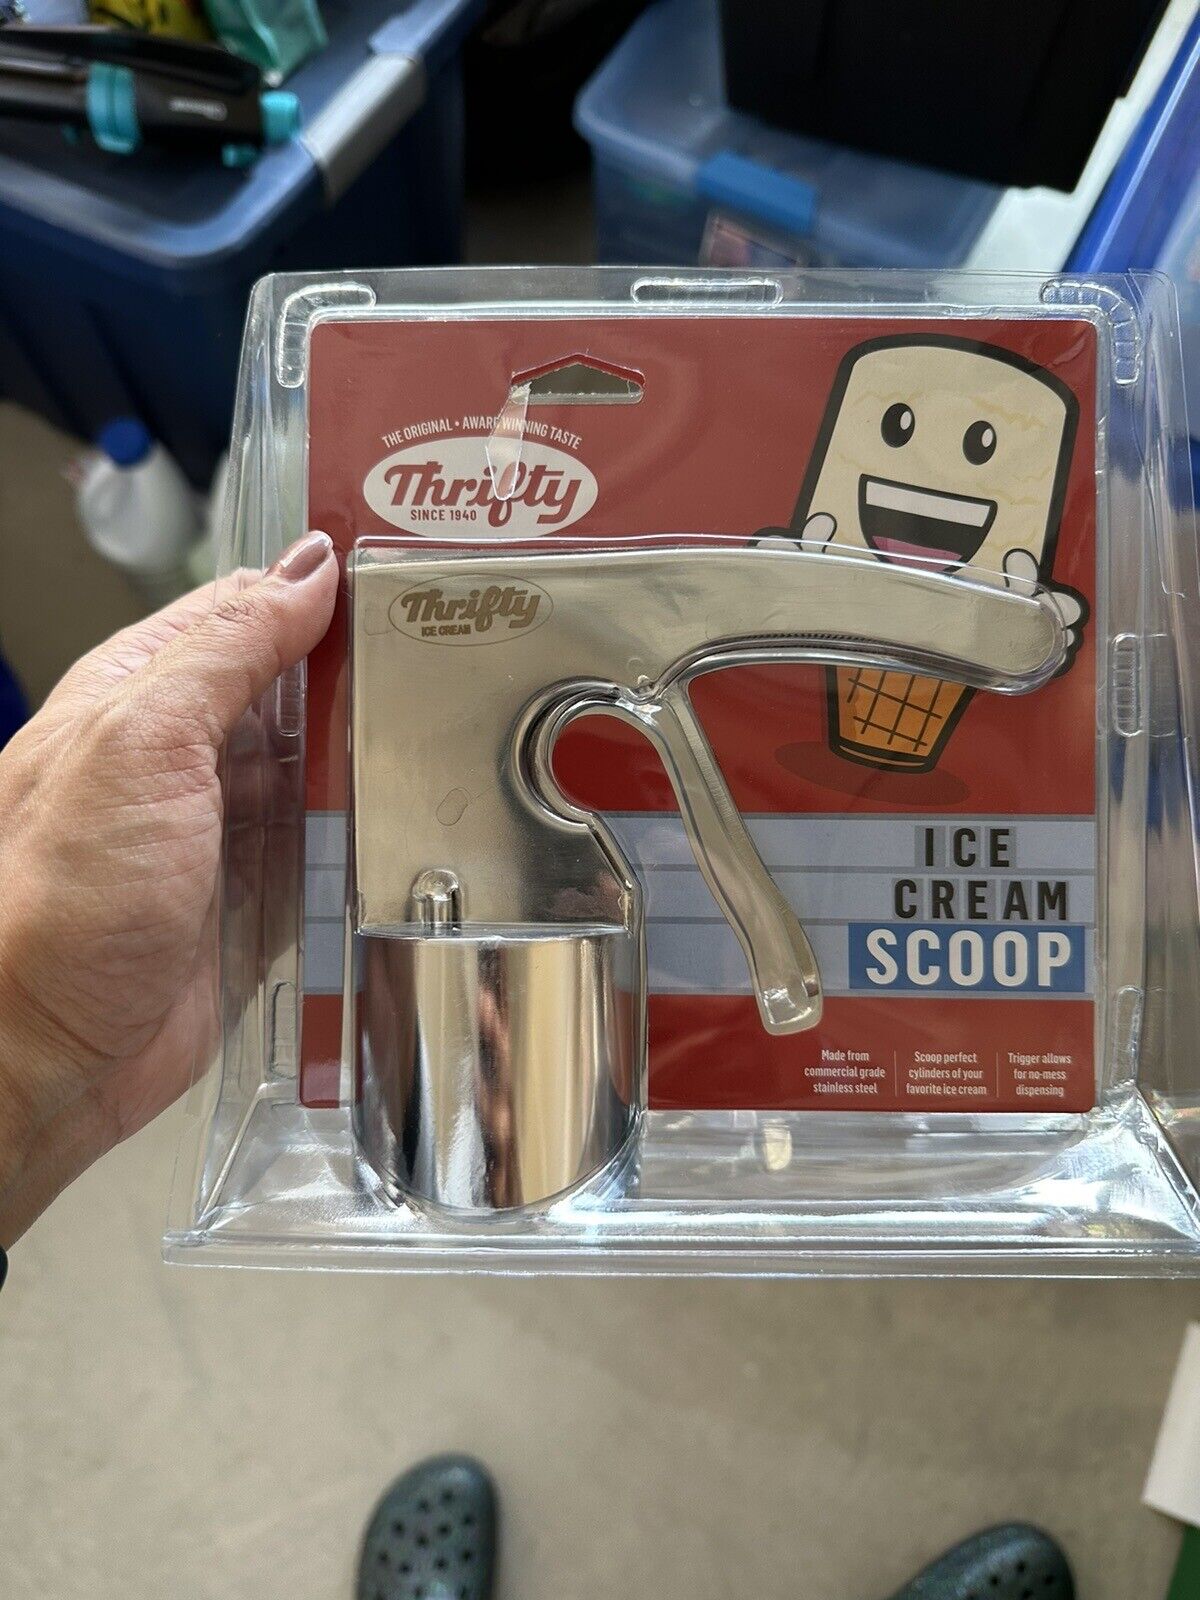 Thrifty / Rite Aid Old Fashioned Ice Cream Scoop - New